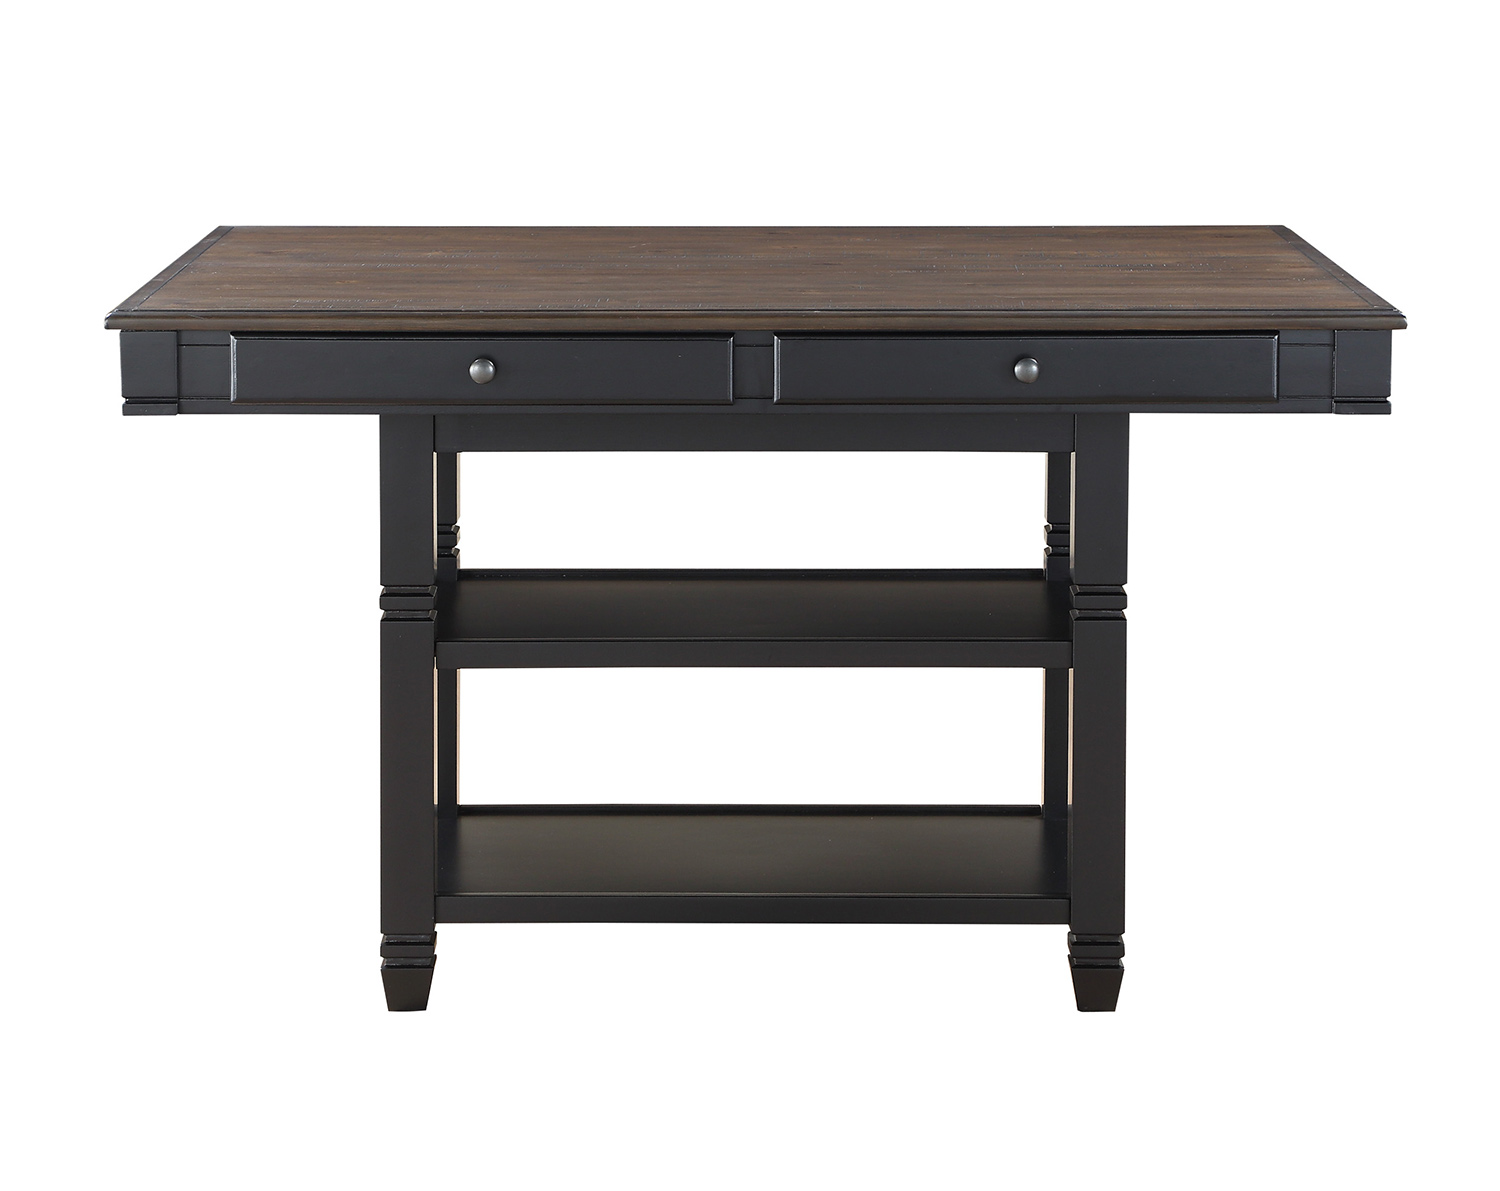 Homelegance Baywater Counter Height Dining Table - Black -Natural